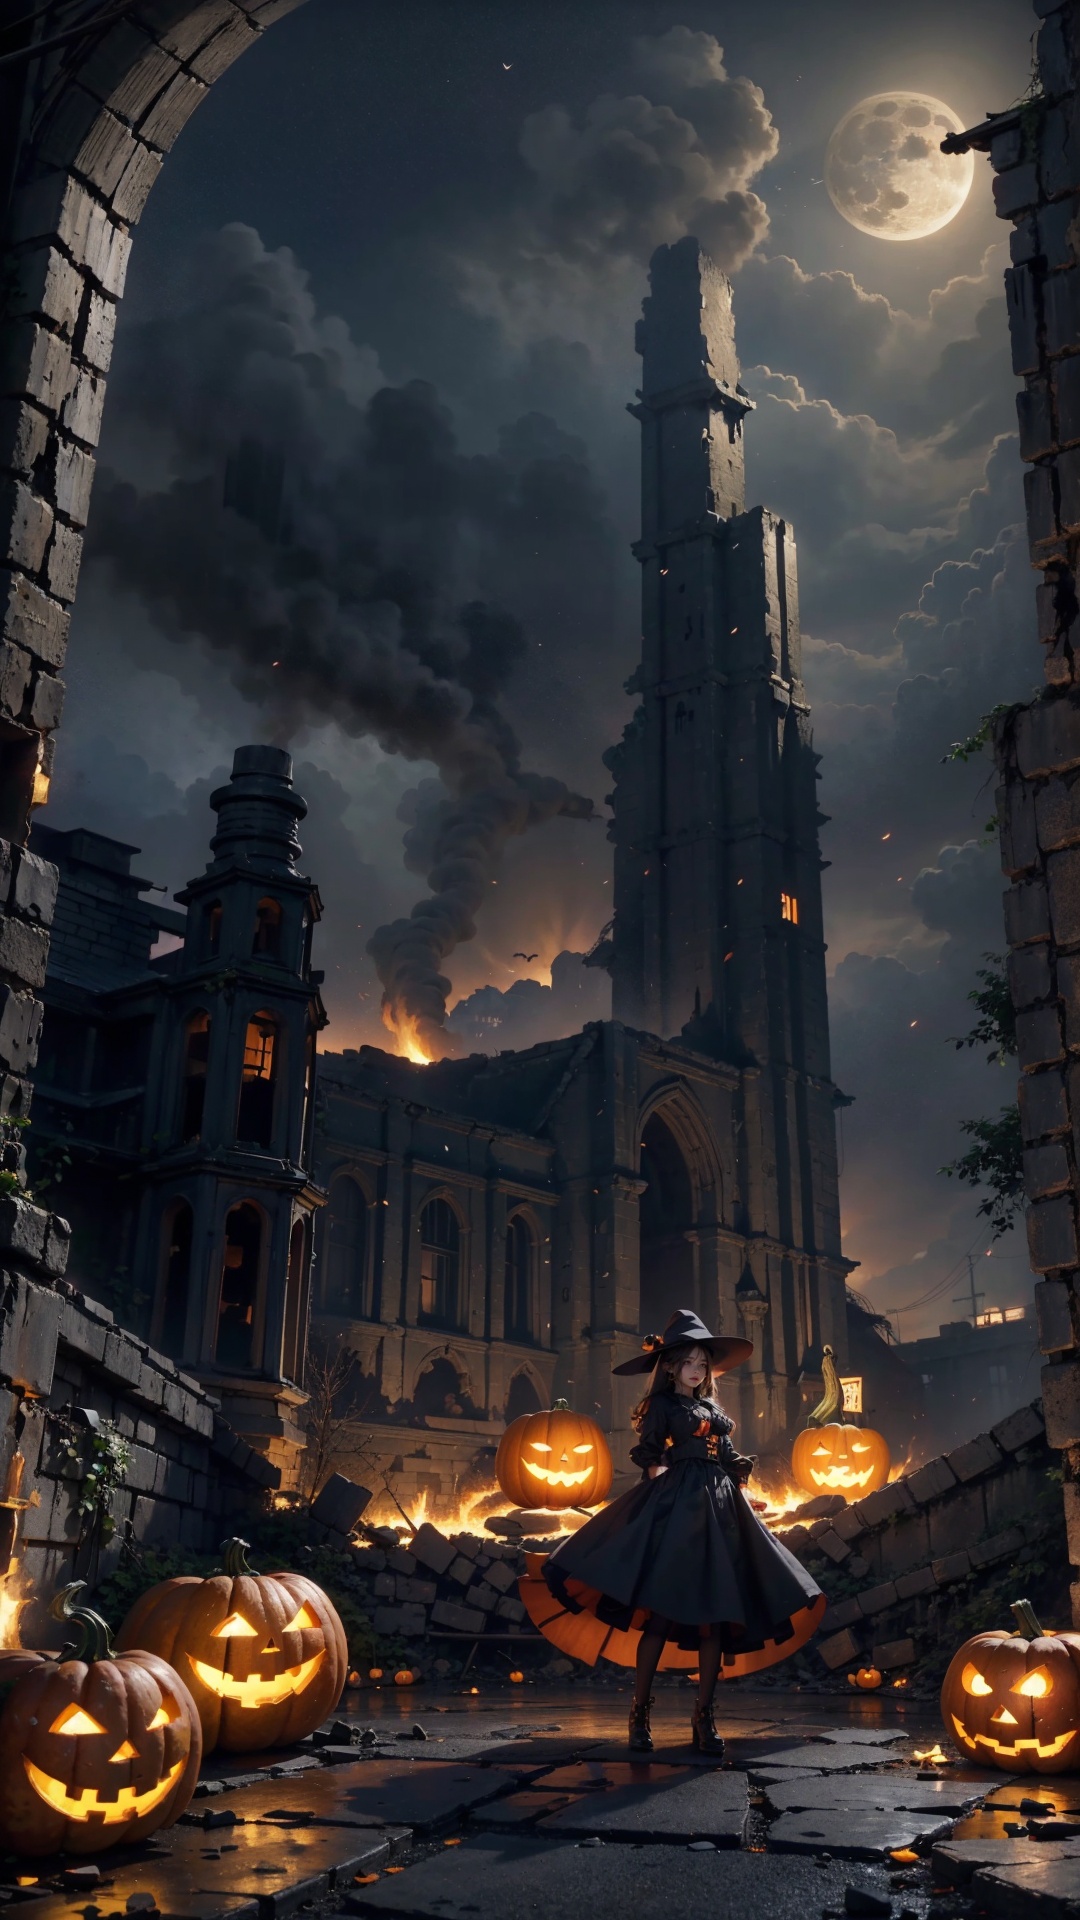  (High detail, high quality, masterpiece), clear focus, war, (ruins), flames and smoke,

On Halloween after the war, the skull,

A girl, wearing a blue and white dress and a witch hat, sat next to the ruins, with flags and neon lights in the ruins

(Pumpkin Lantern: 1.2), (surrounded by pumpkin lanterns), pumpkin lanterns scattered in the scene, some in the front, some in the back, full of hidden details, dynamic postures,

Full Moon, Flowers, Bats, Fantasy Illustrations, Fusion of Reality and Fantasy Elements, (Color: 1.2) (Digital Painting: 1.1), Epic Scene, OC Rendering, Looking Up, Ultra Wide Angle, Fish Eye, Lens Focus, Full Body, 16K, , Postwar ruins